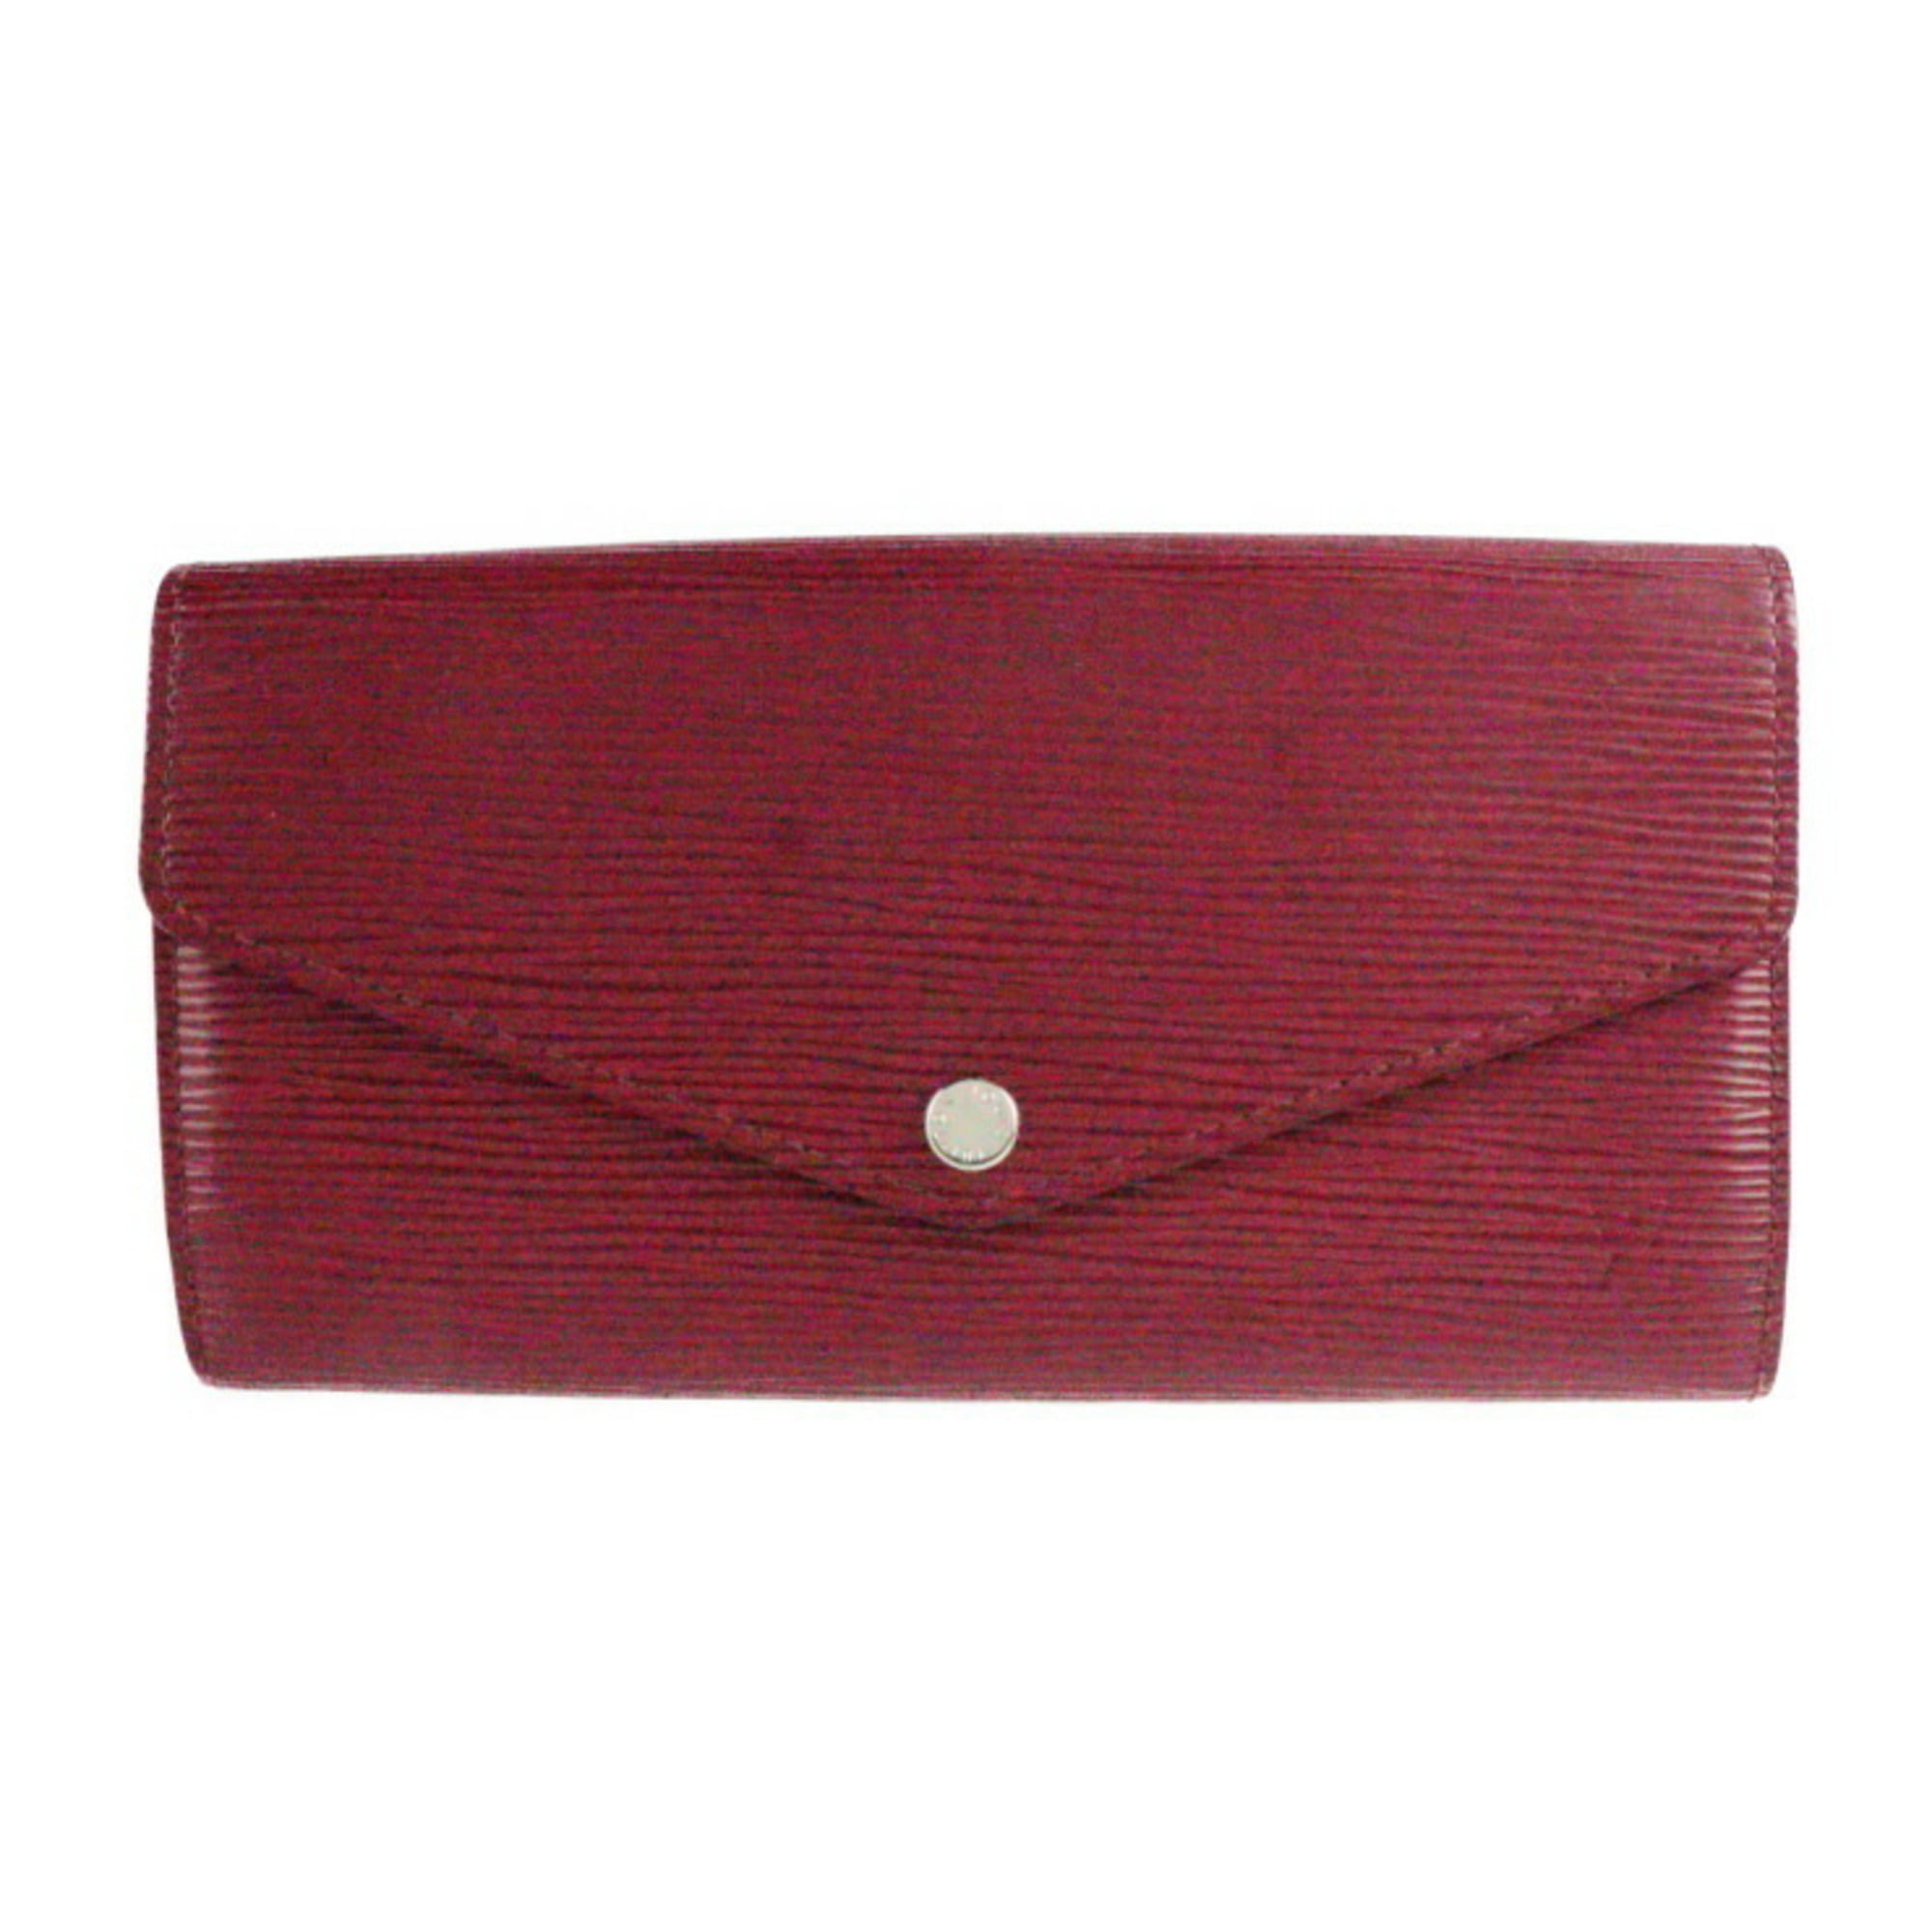 Louis Vuitton - Authenticated Wallet - Red for Women, Very Good Condition